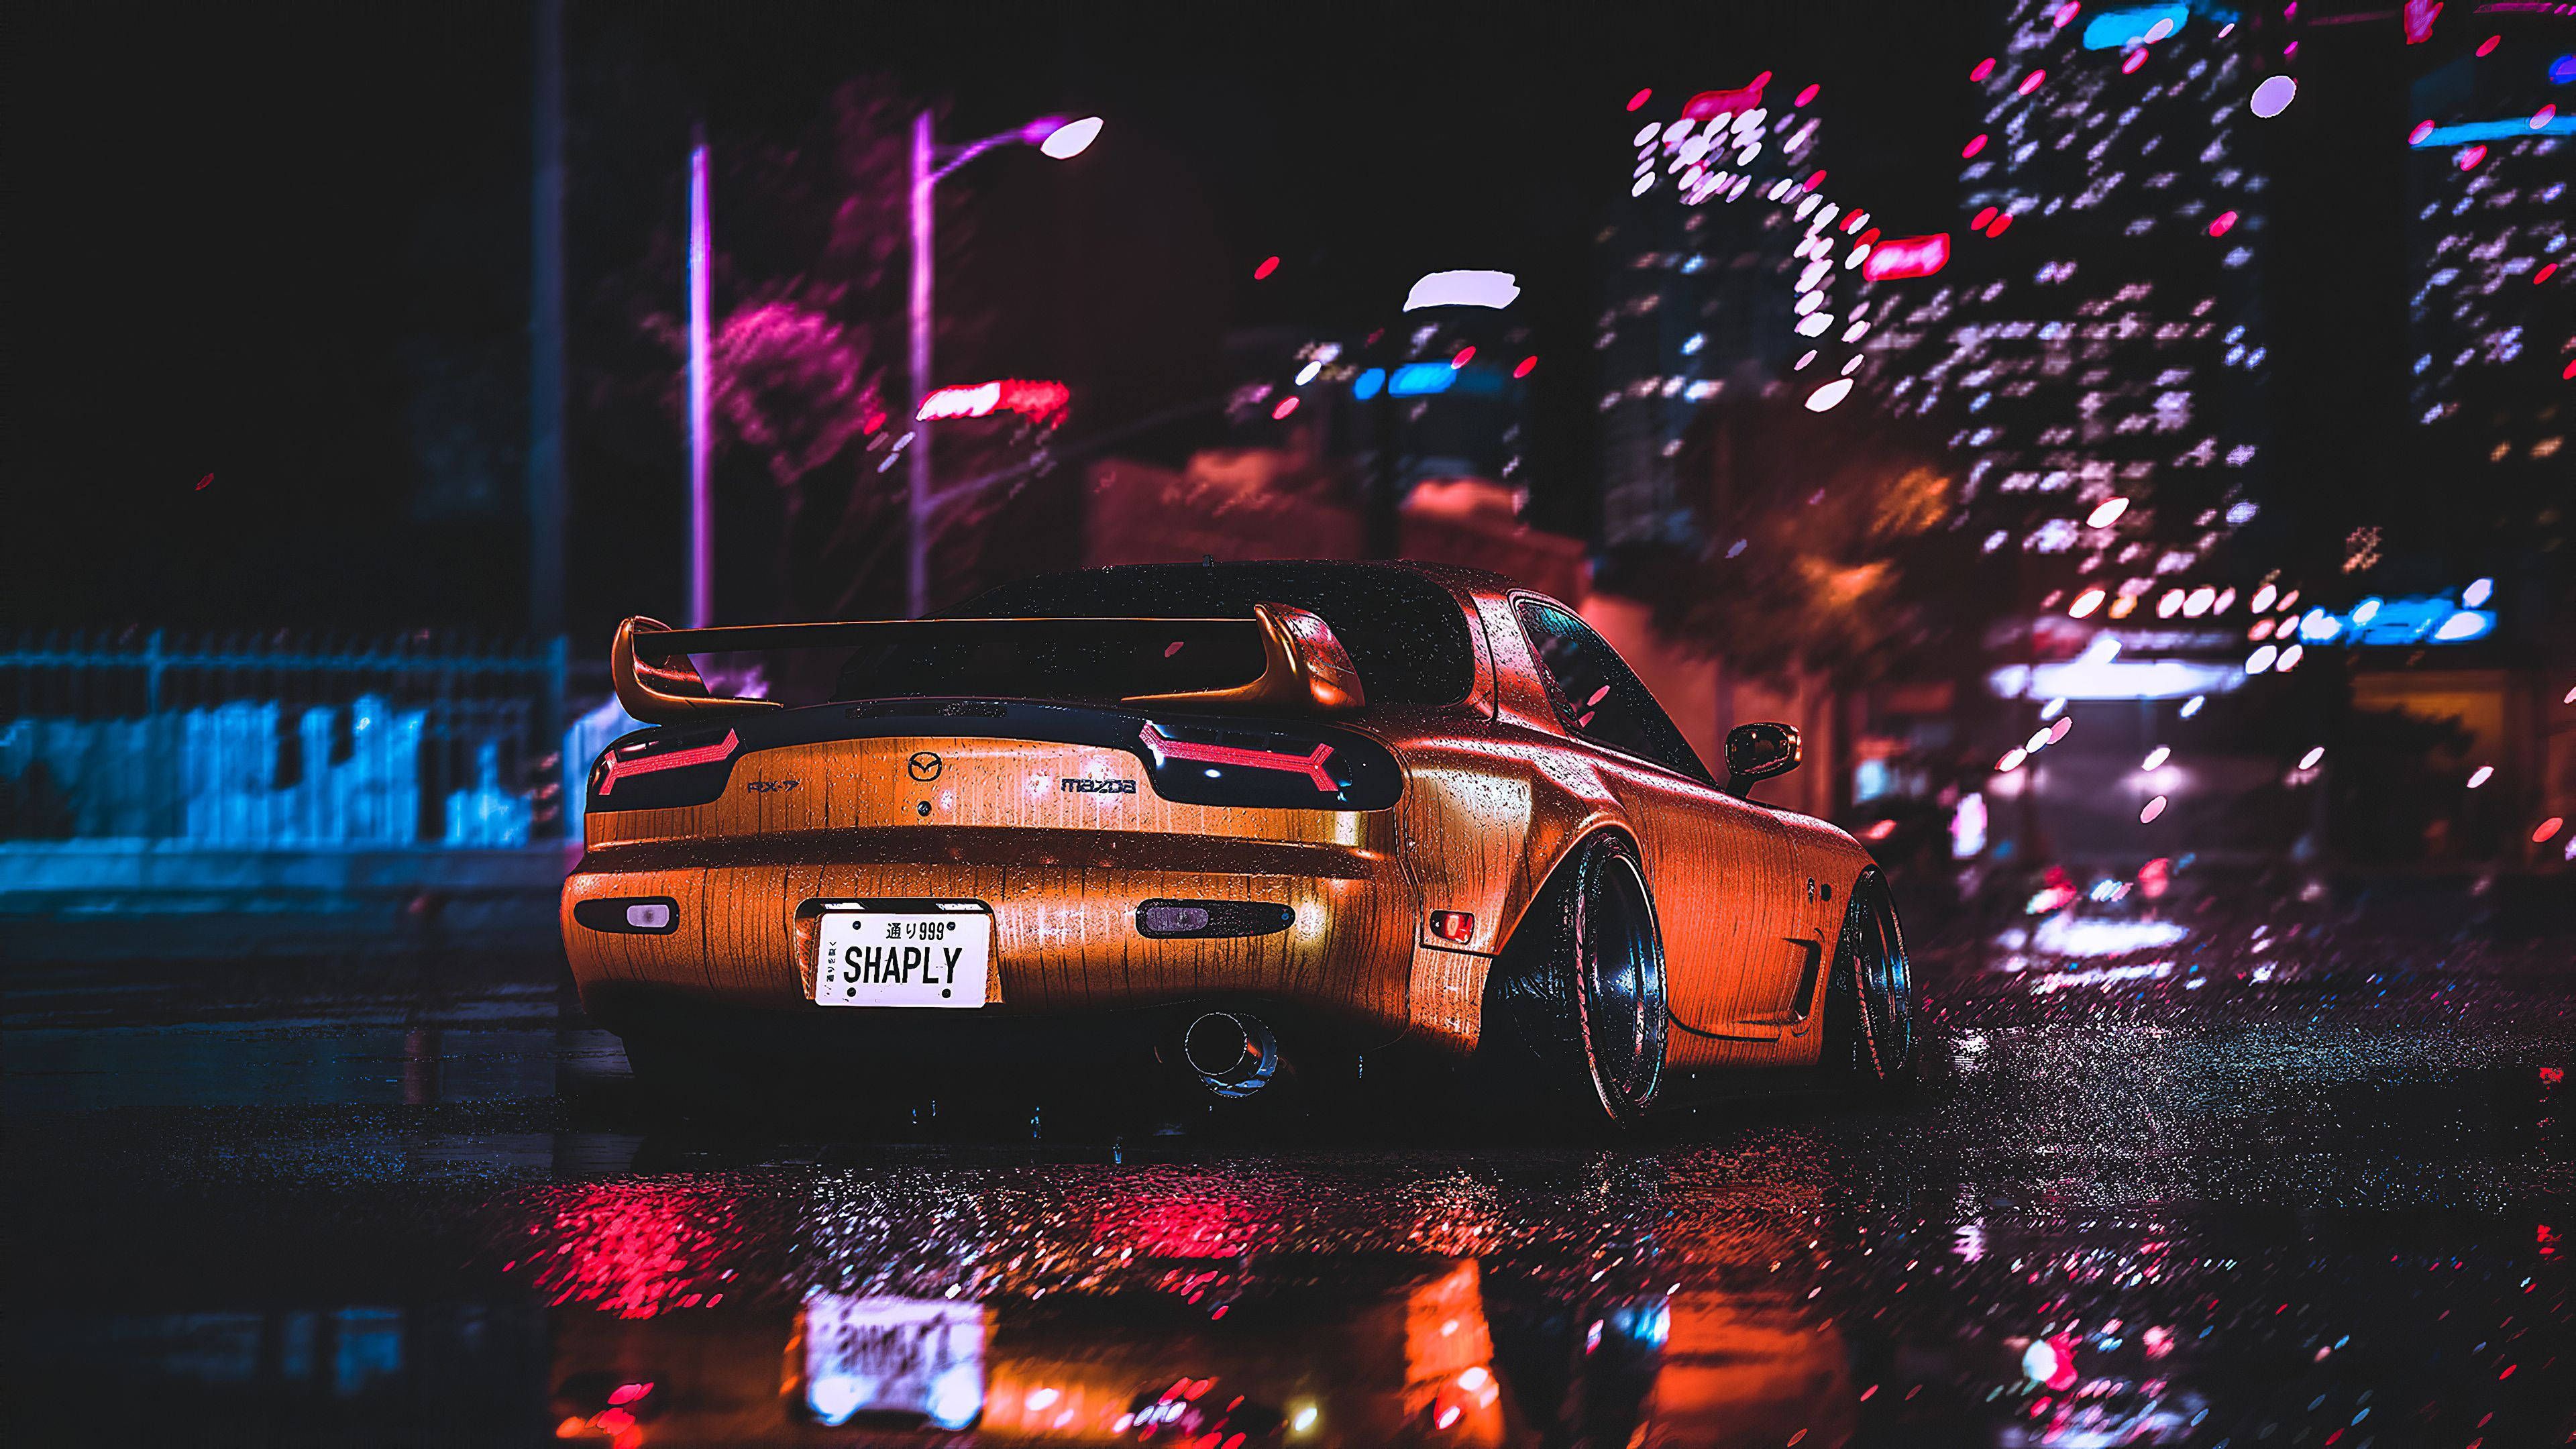 1920x1200 ] Need for Speed Payback, video games, sports car, tuning, night, the city, tuning, 1920x1200 wallpaper - JDM, cars